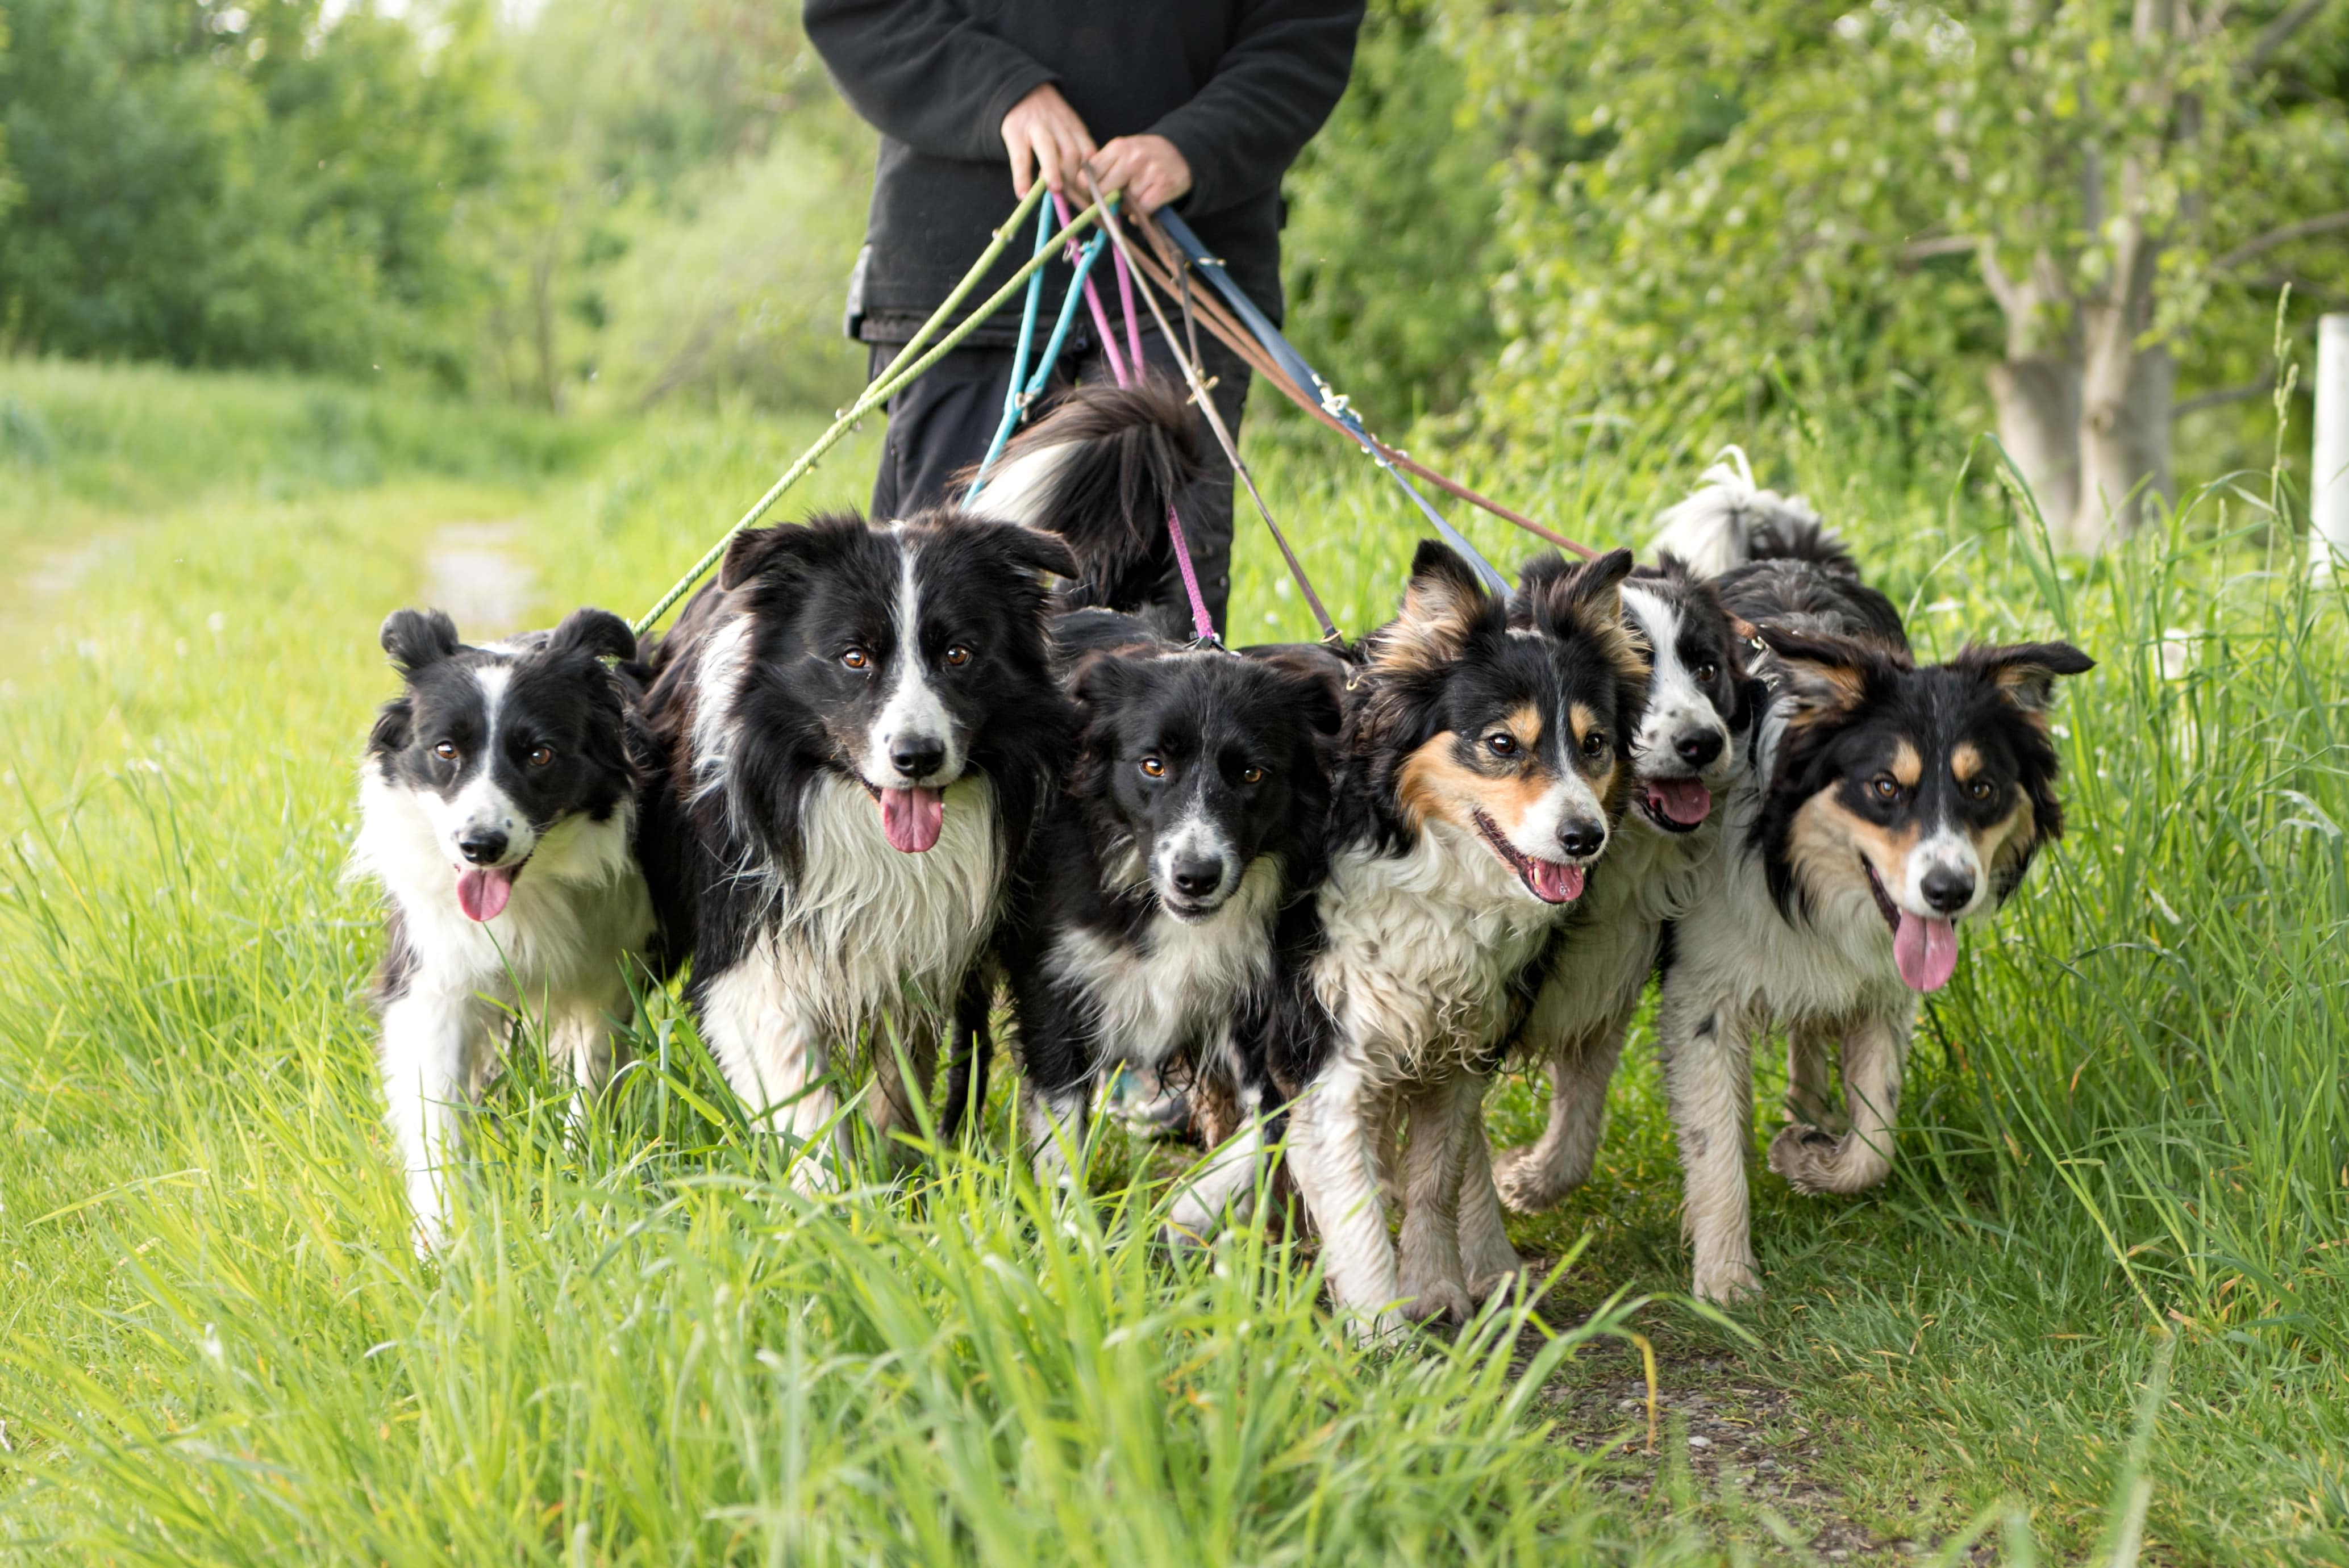 Lots of Collies with their dog walker.